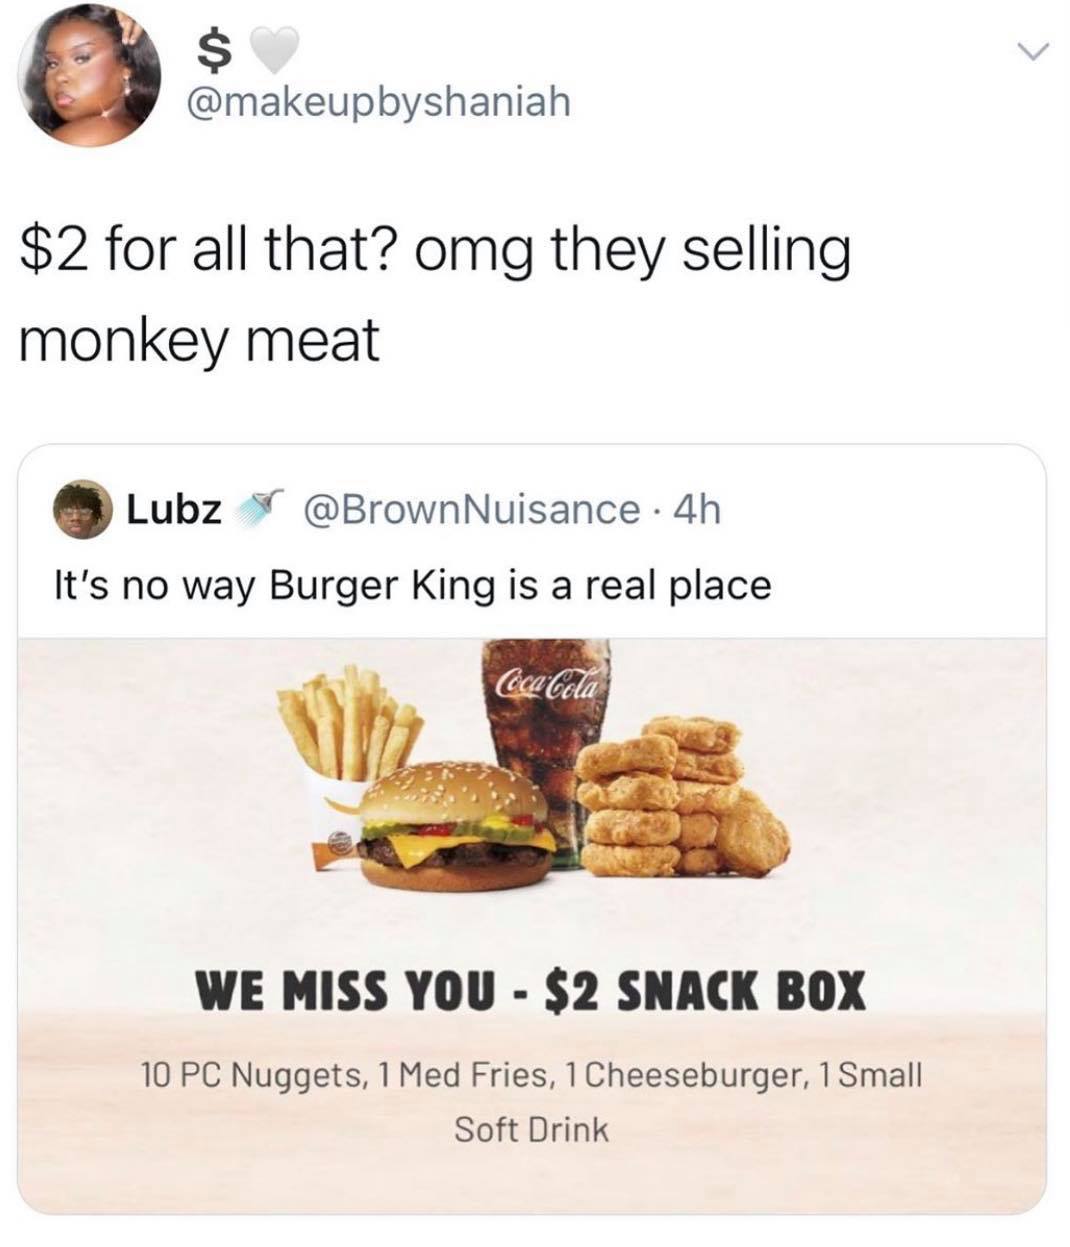 burger king we miss you snack box - $ $2 for all that? omg they selling monkey meat Lubz Nuisance . 4h It's no way Burger King is a real place Coca Cola We Miss You $2 Snack Box 10 Pc Nuggets, 1 Med Fries, 1 Cheeseburger, 1 Small Soft Drink